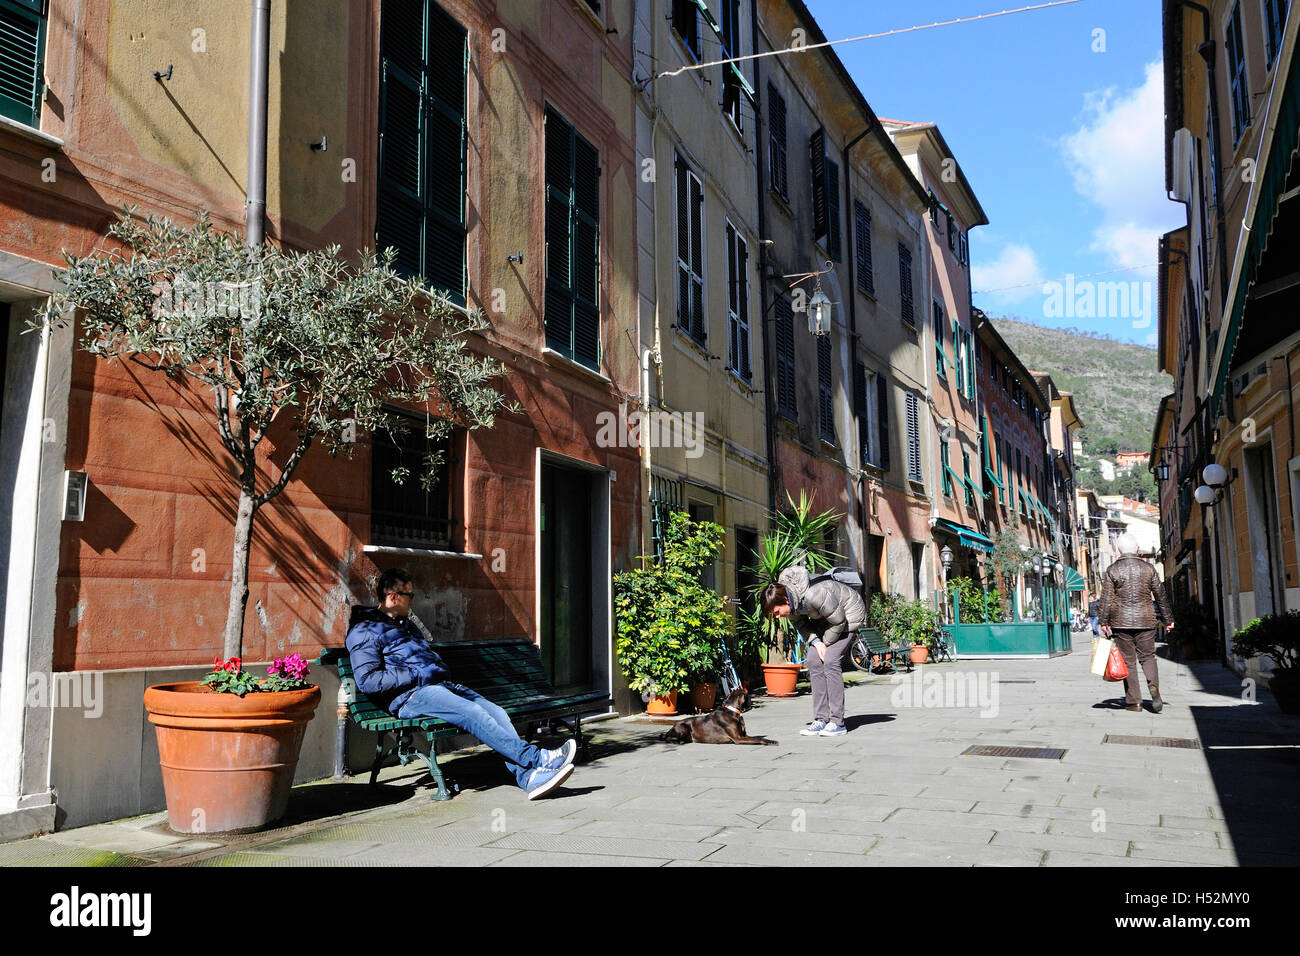 Streetview in Levanto (Liguria) Italy, with people sitting on bench. Stock Photo